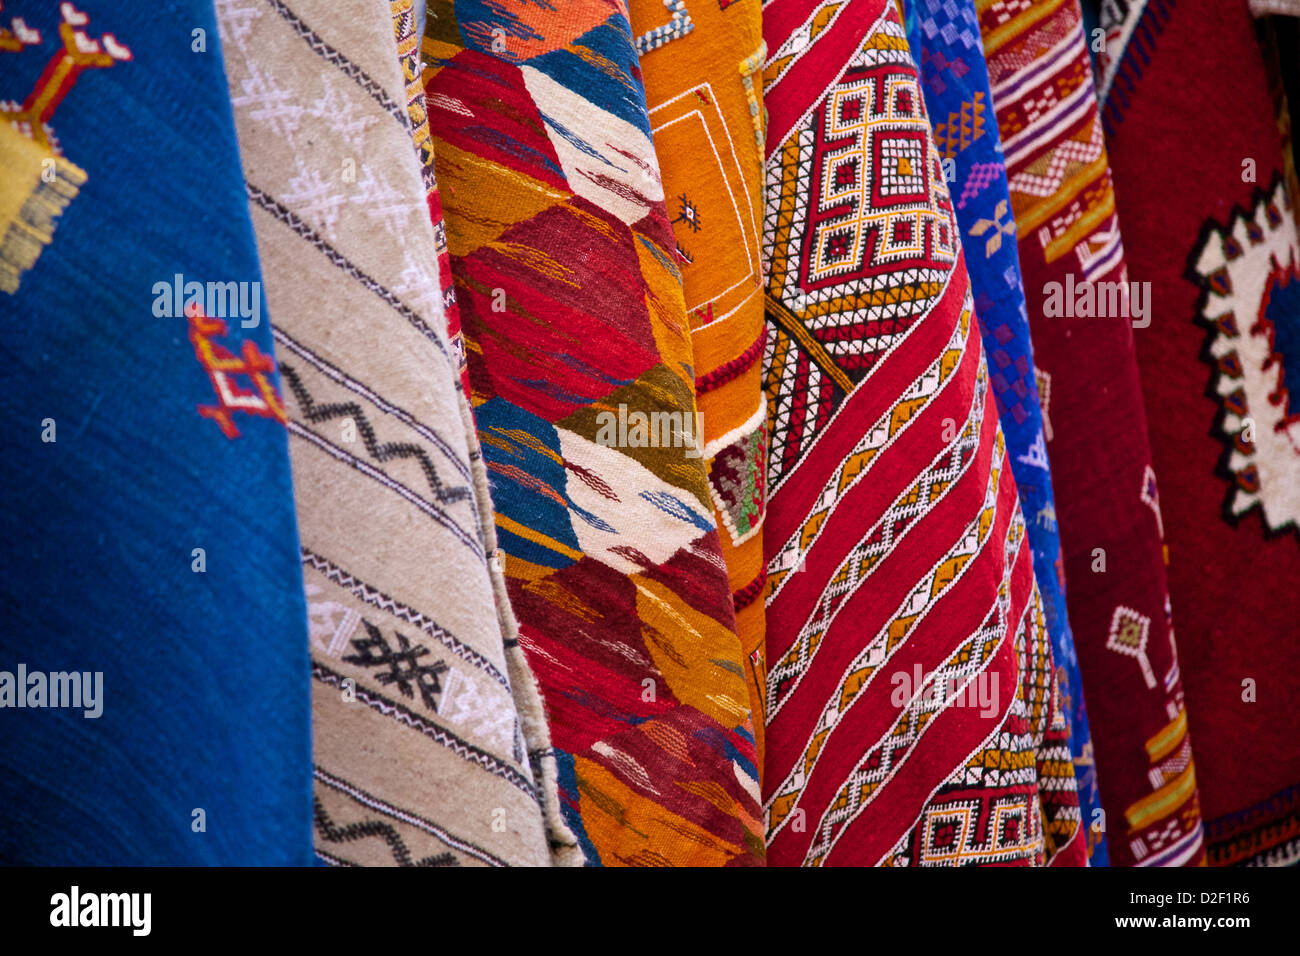 Rugs for sale in the souk of Marrakech Stock Photo